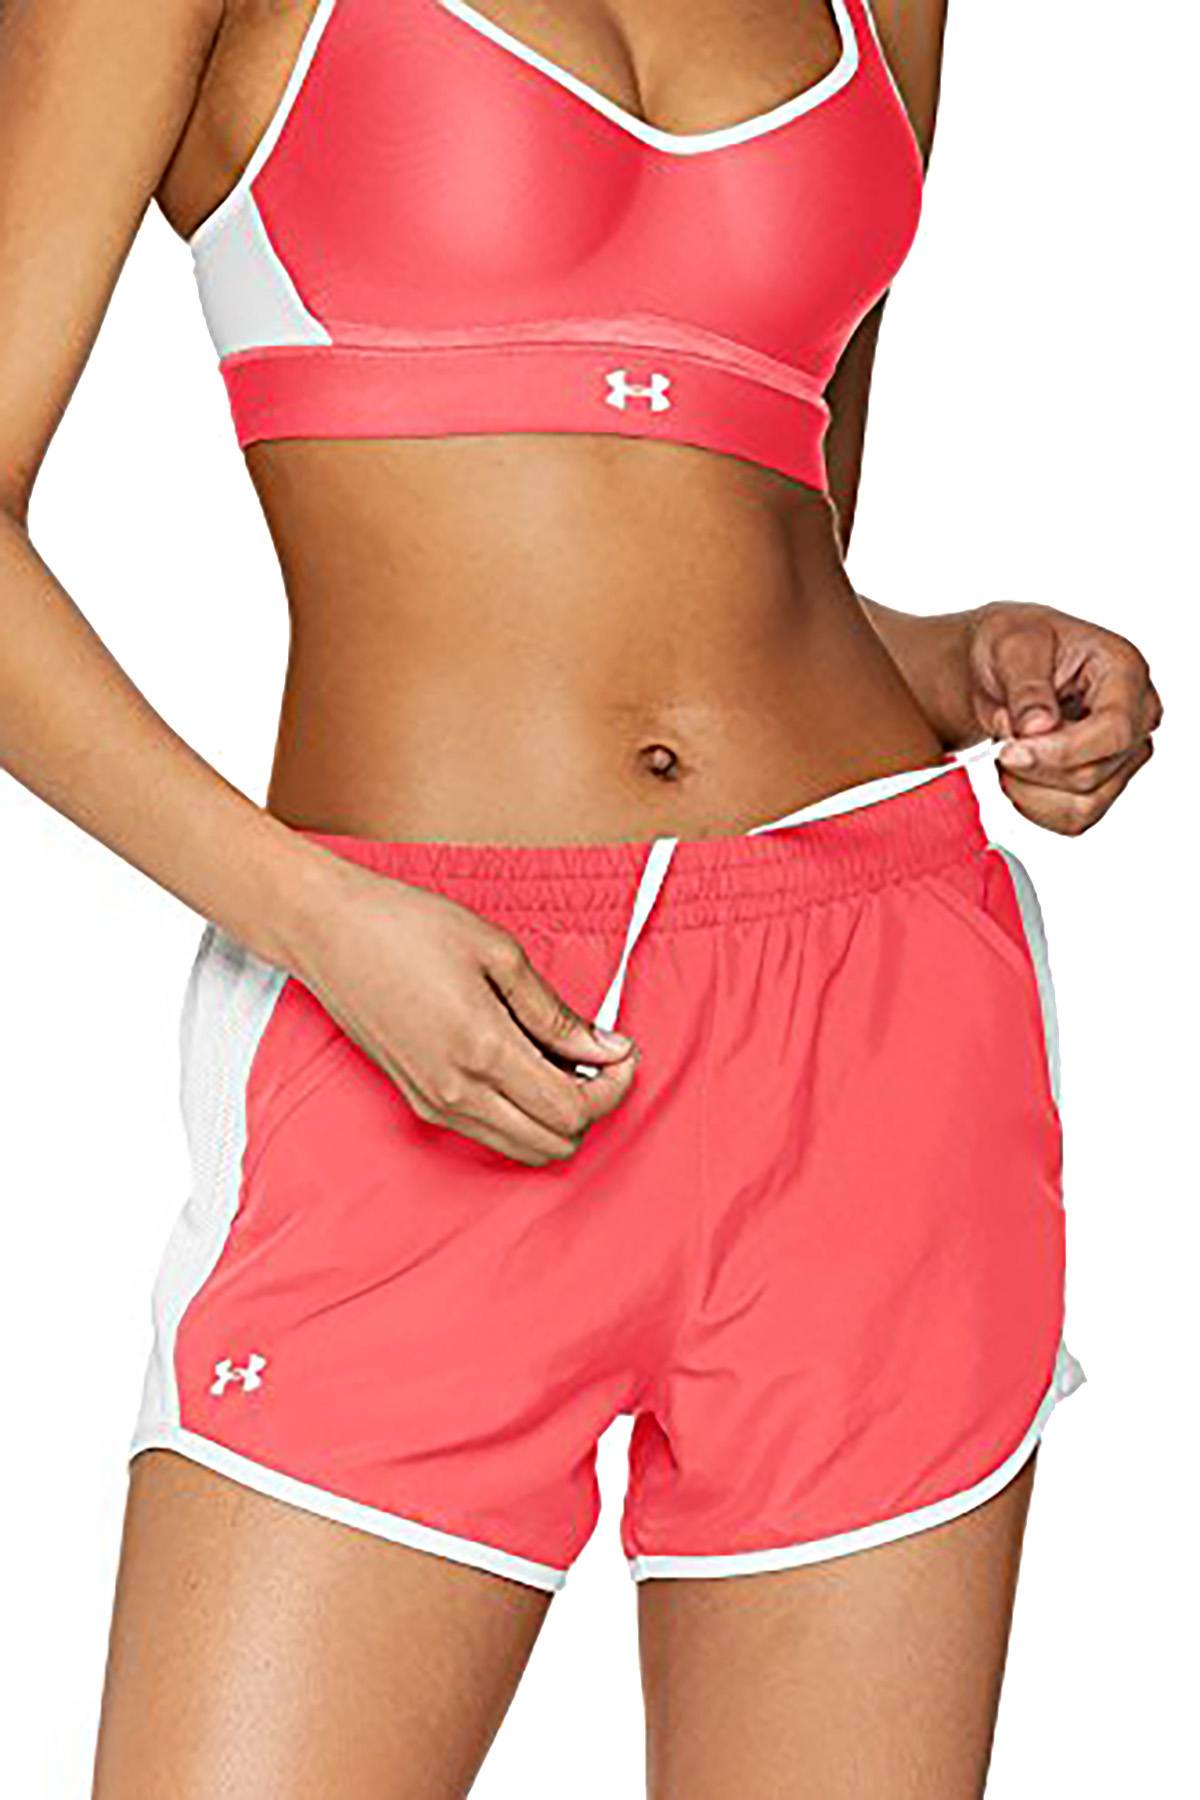 Under Armour Brilliance/White Fly-By Running Short